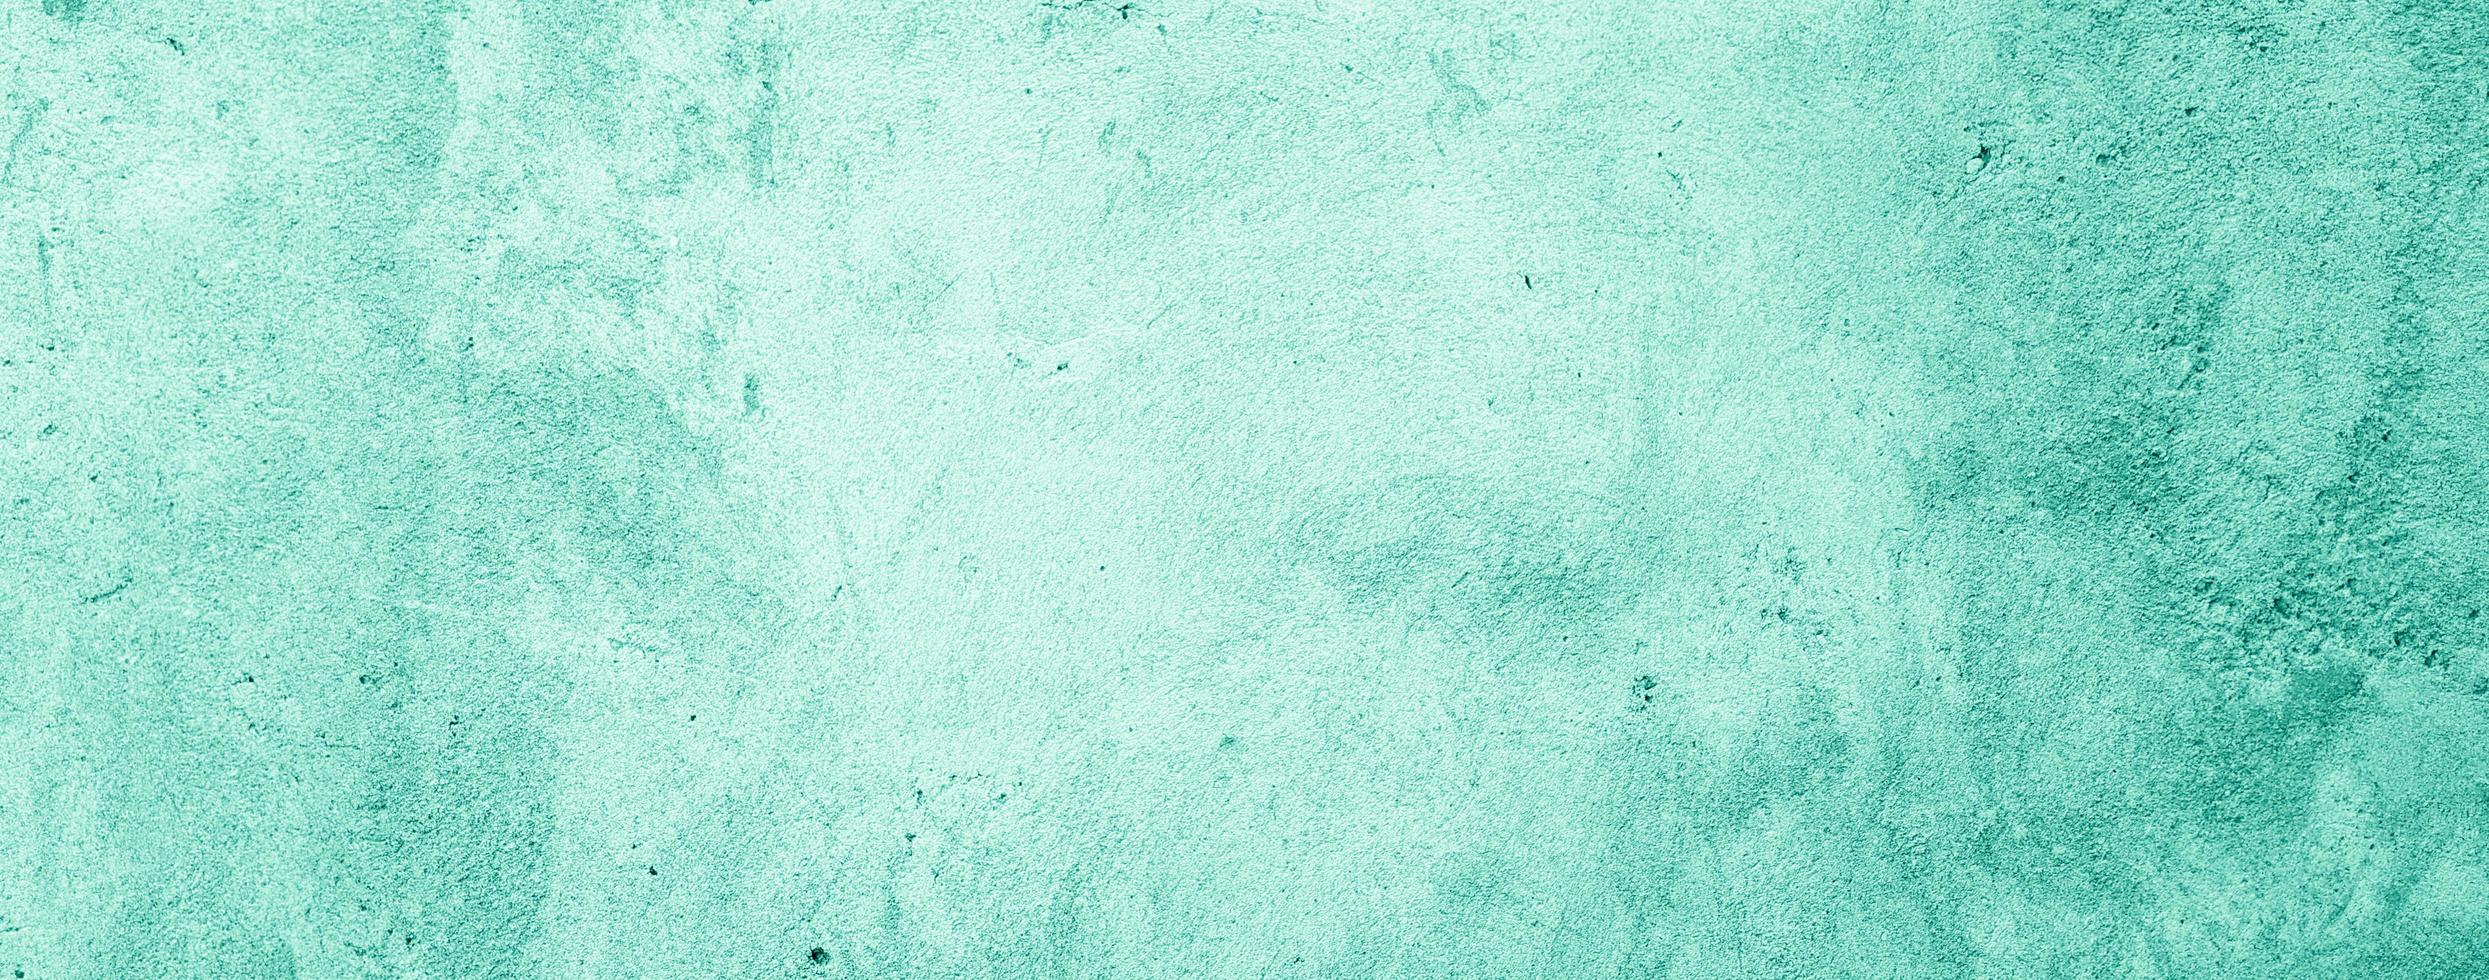 blue pastel abstract concrete wall texture background 4838352 Stock ...